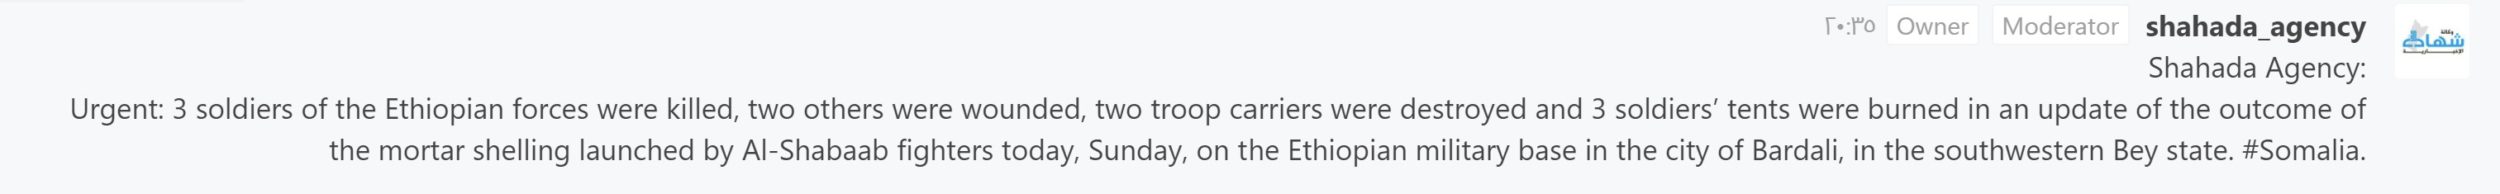 (Claim) al-Shabaab: Three Ethiopian Forces Were Killed and Two Others Were Wounded, Two Troop Carriers Were Destroyed and Three Soldiers' Tents Were Burned Mujahideen's attack on an Ethiopian Military Base in Bardali, Southwestern Bay State, Somalia - 3 April 2022